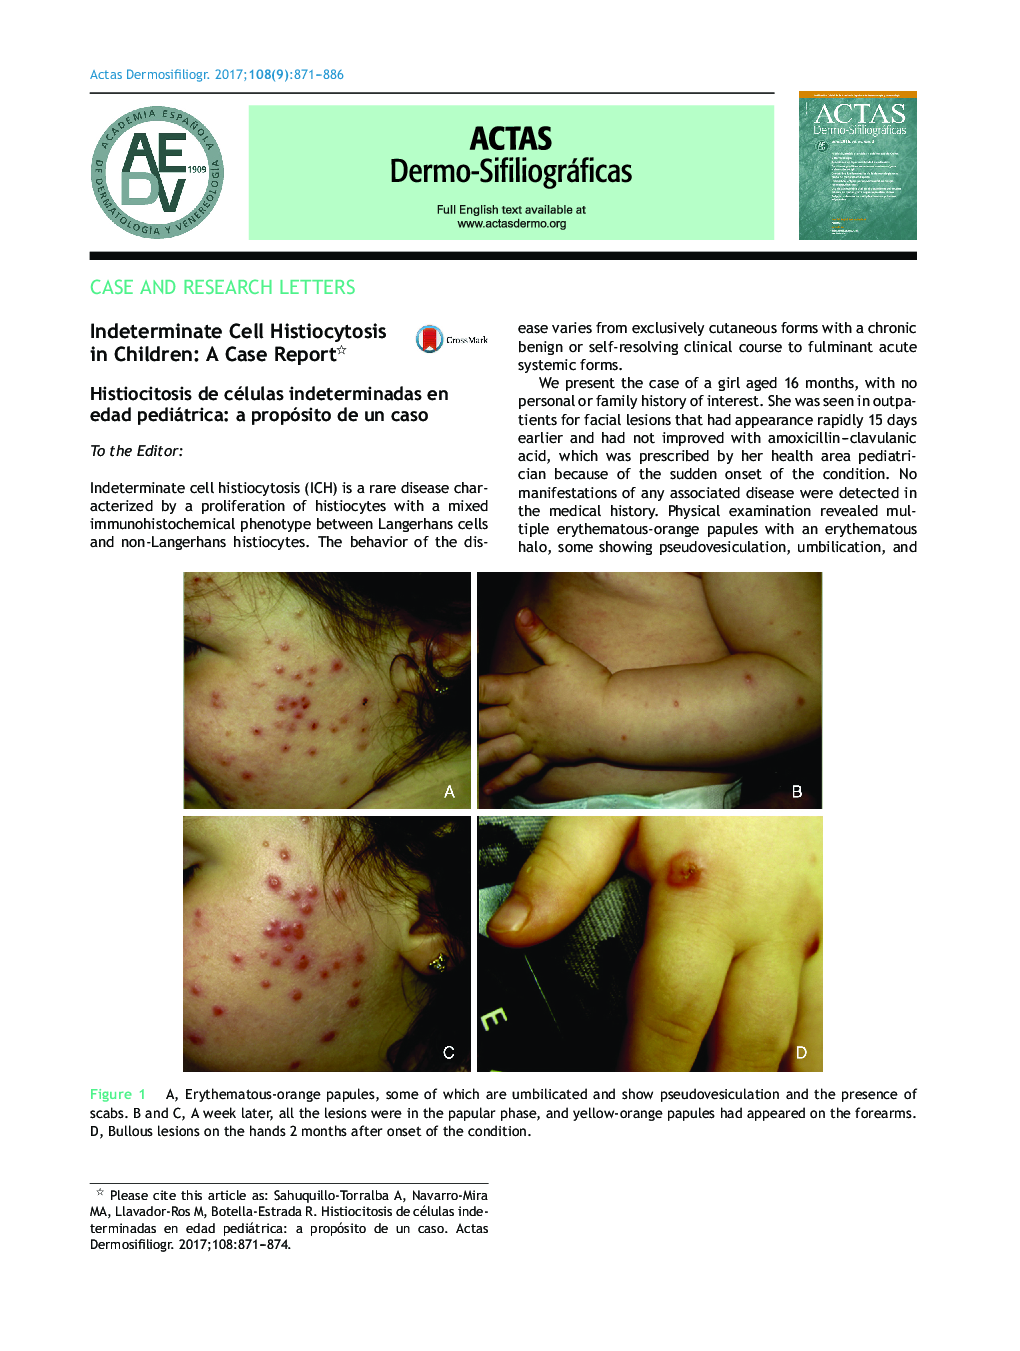 Indeterminate Cell Histiocytosis in Children: A Case Report